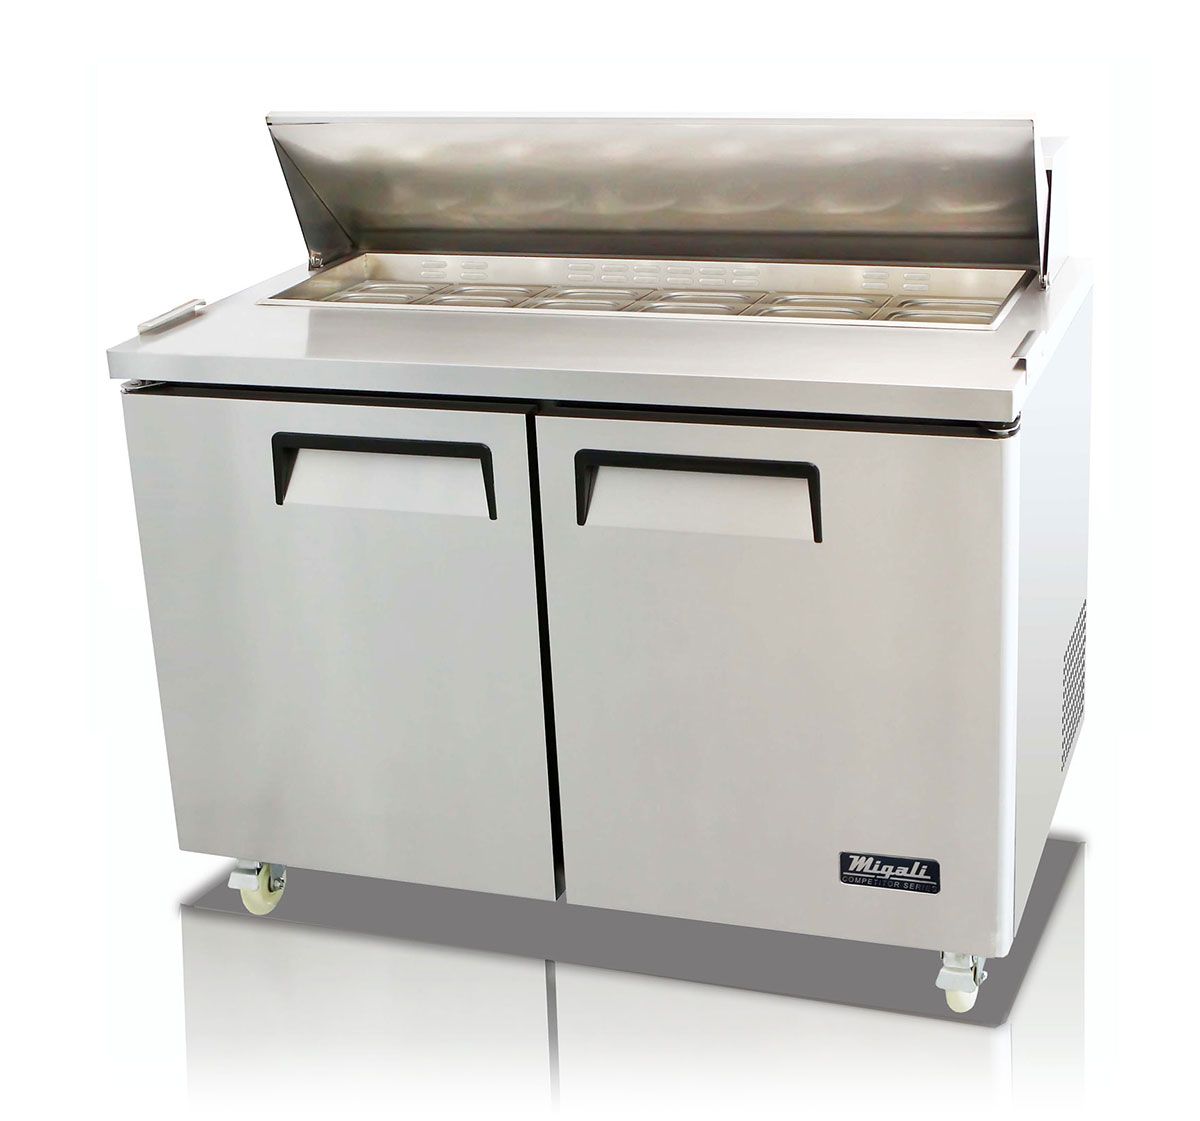 C-sp48-12-hc 48.2 In. Competitor Series Refrigerated Counter & Sandwich Preparation Table, Stainless Steel & Galvanized Steel